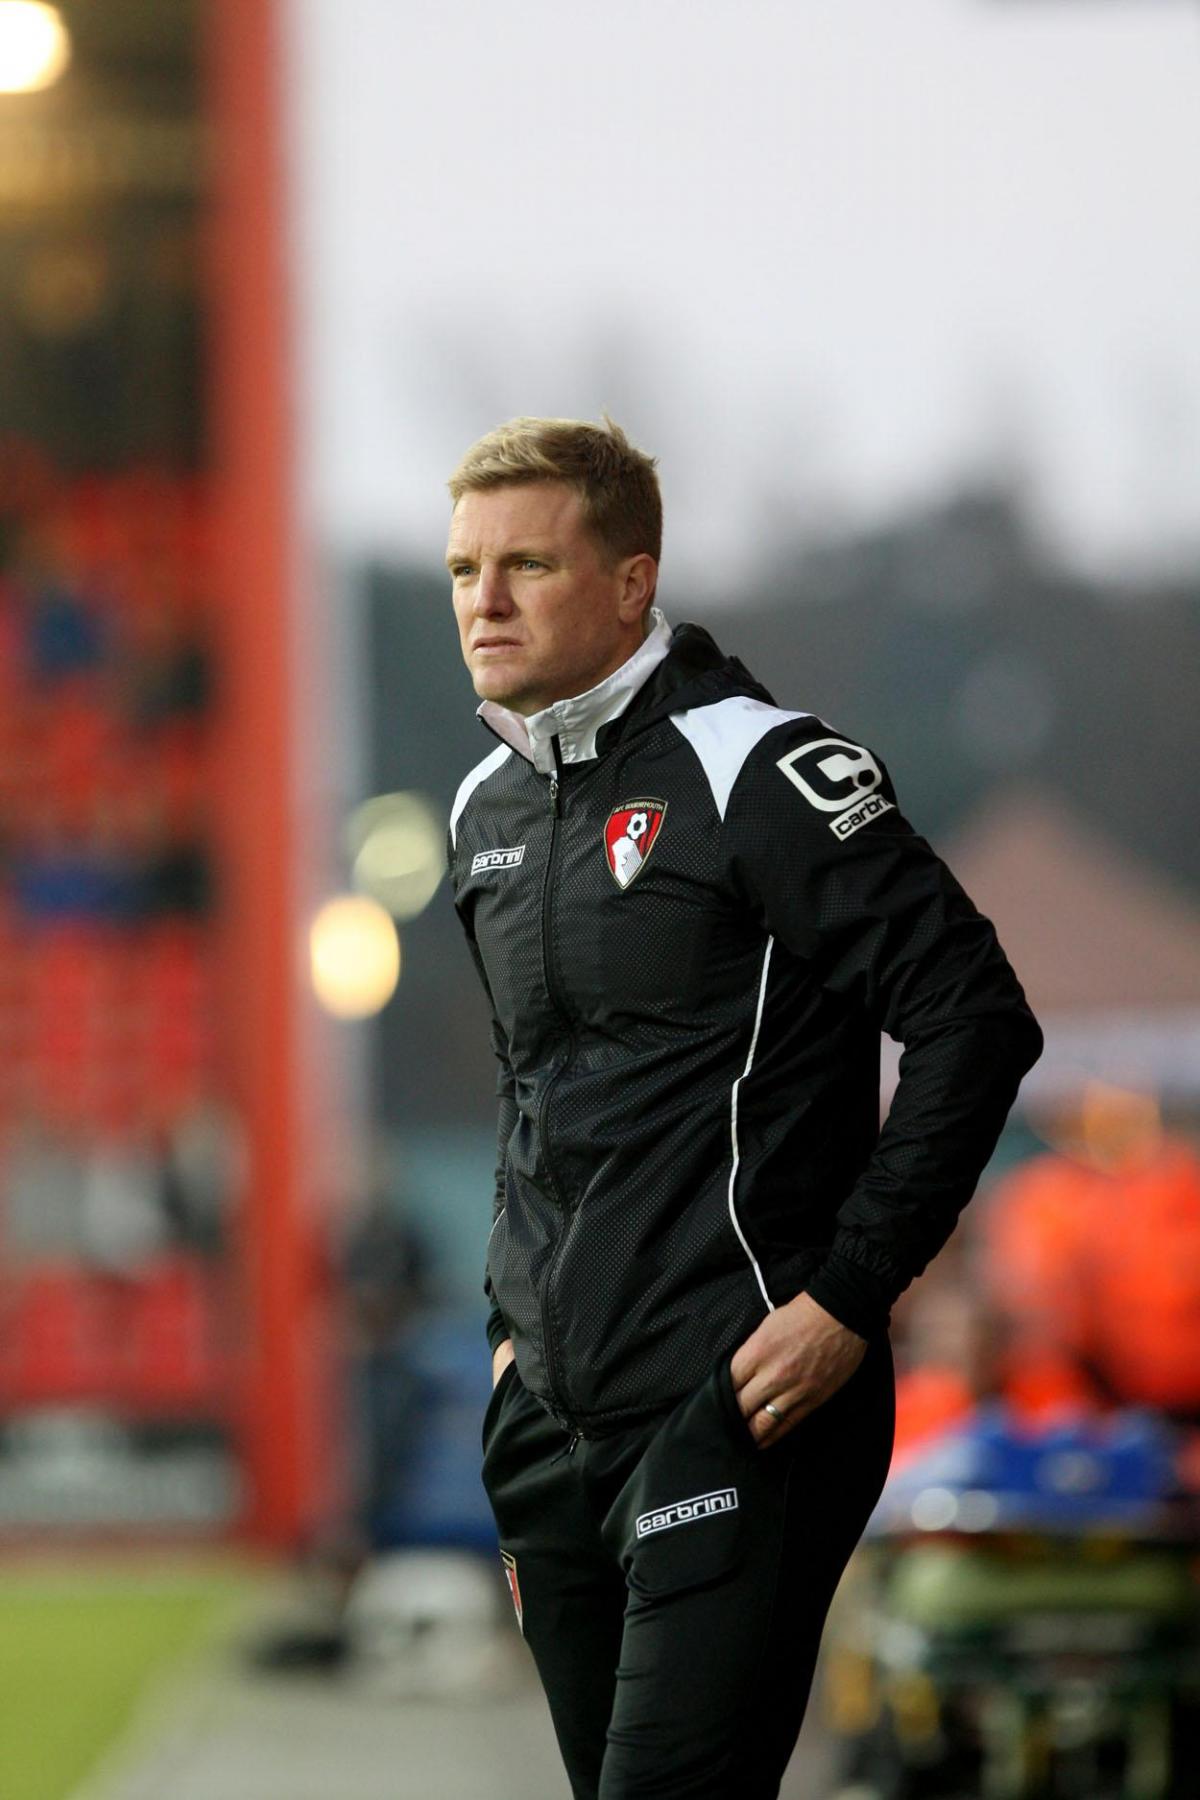 AFC Bournemouth v Millwall at the Goldsands Stadium on Saturday, November 29. Pictures by Corin Messer. 